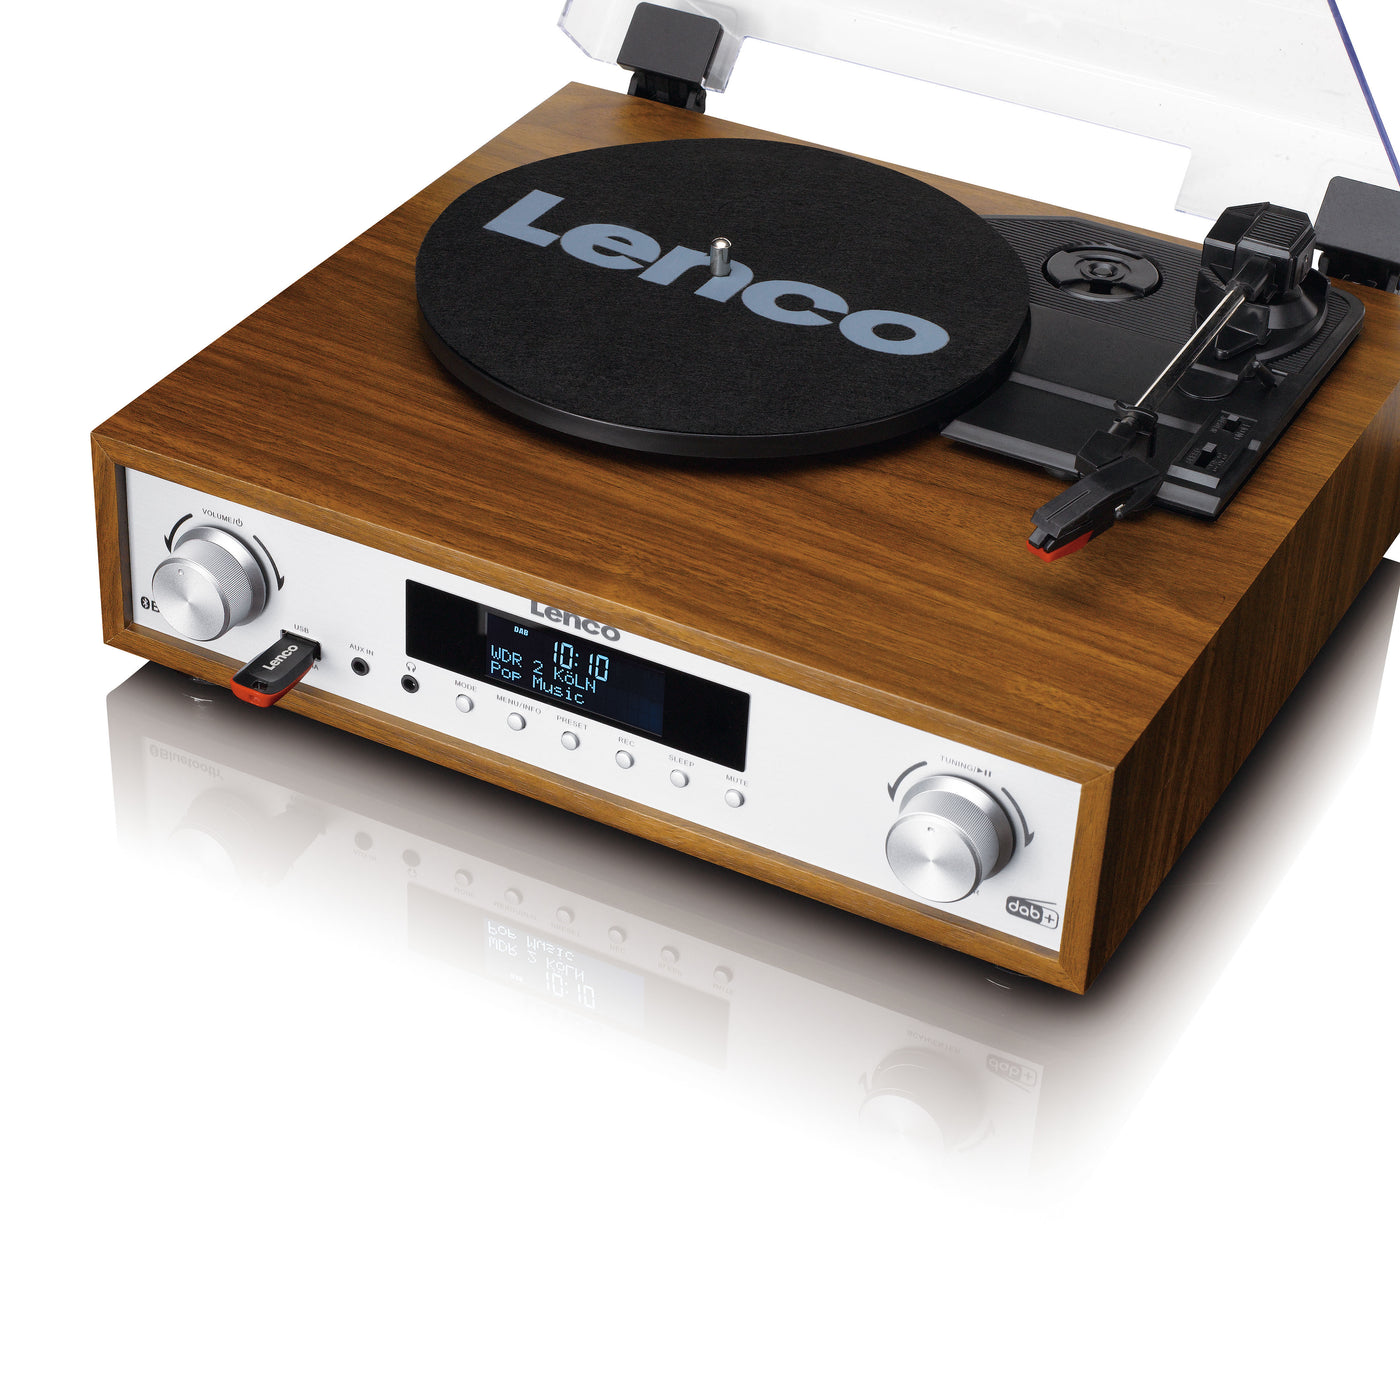 LENCO MC-160WD - HiFi Stereo system with Record Player, DAB+/FM radio, and Bluetooth® - Wood